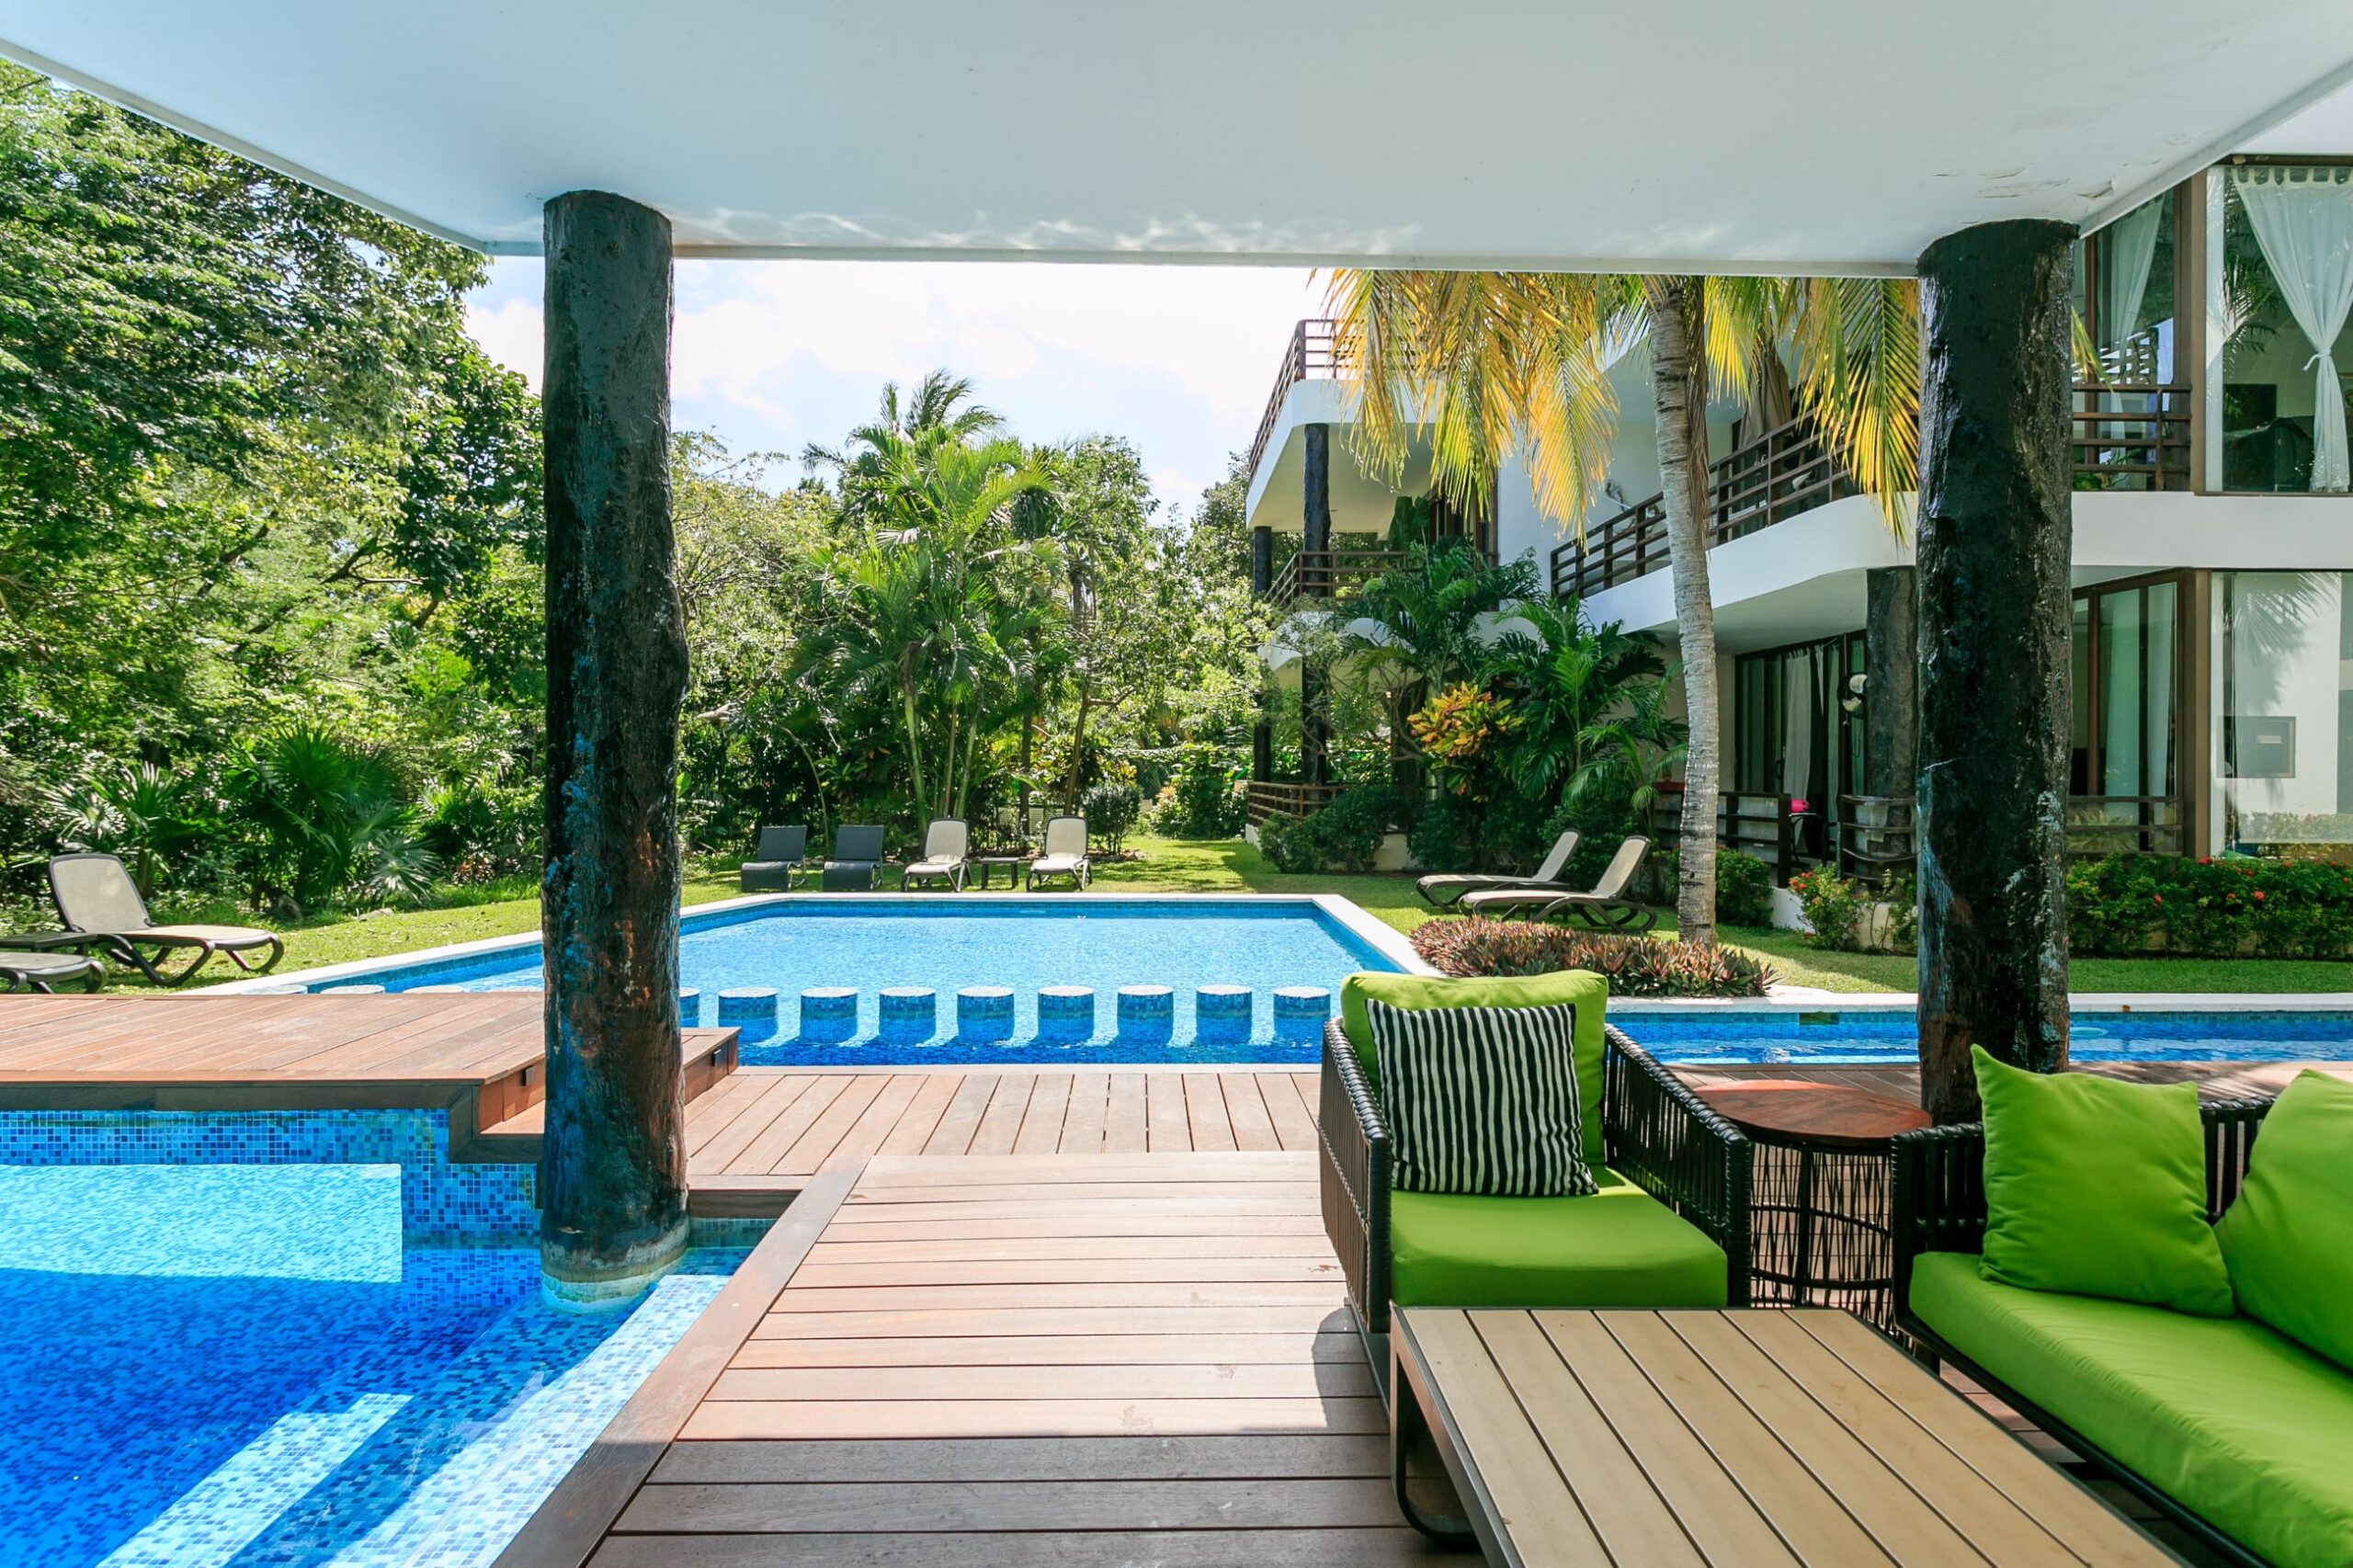 s playacar real estate akoya condo common area with lounge zone